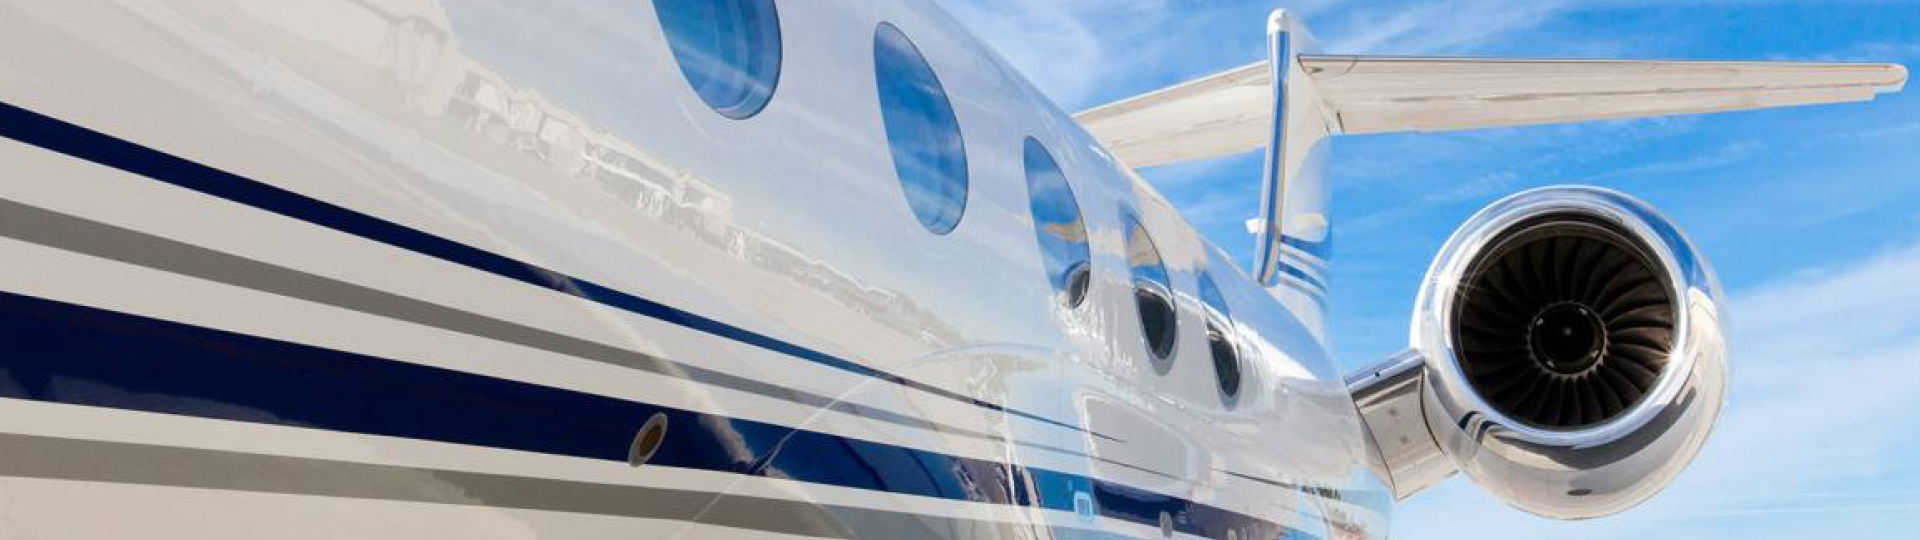 Close-up of G550 idles on tarmac at Corporate Wings FBO location in South Bend, Indiana